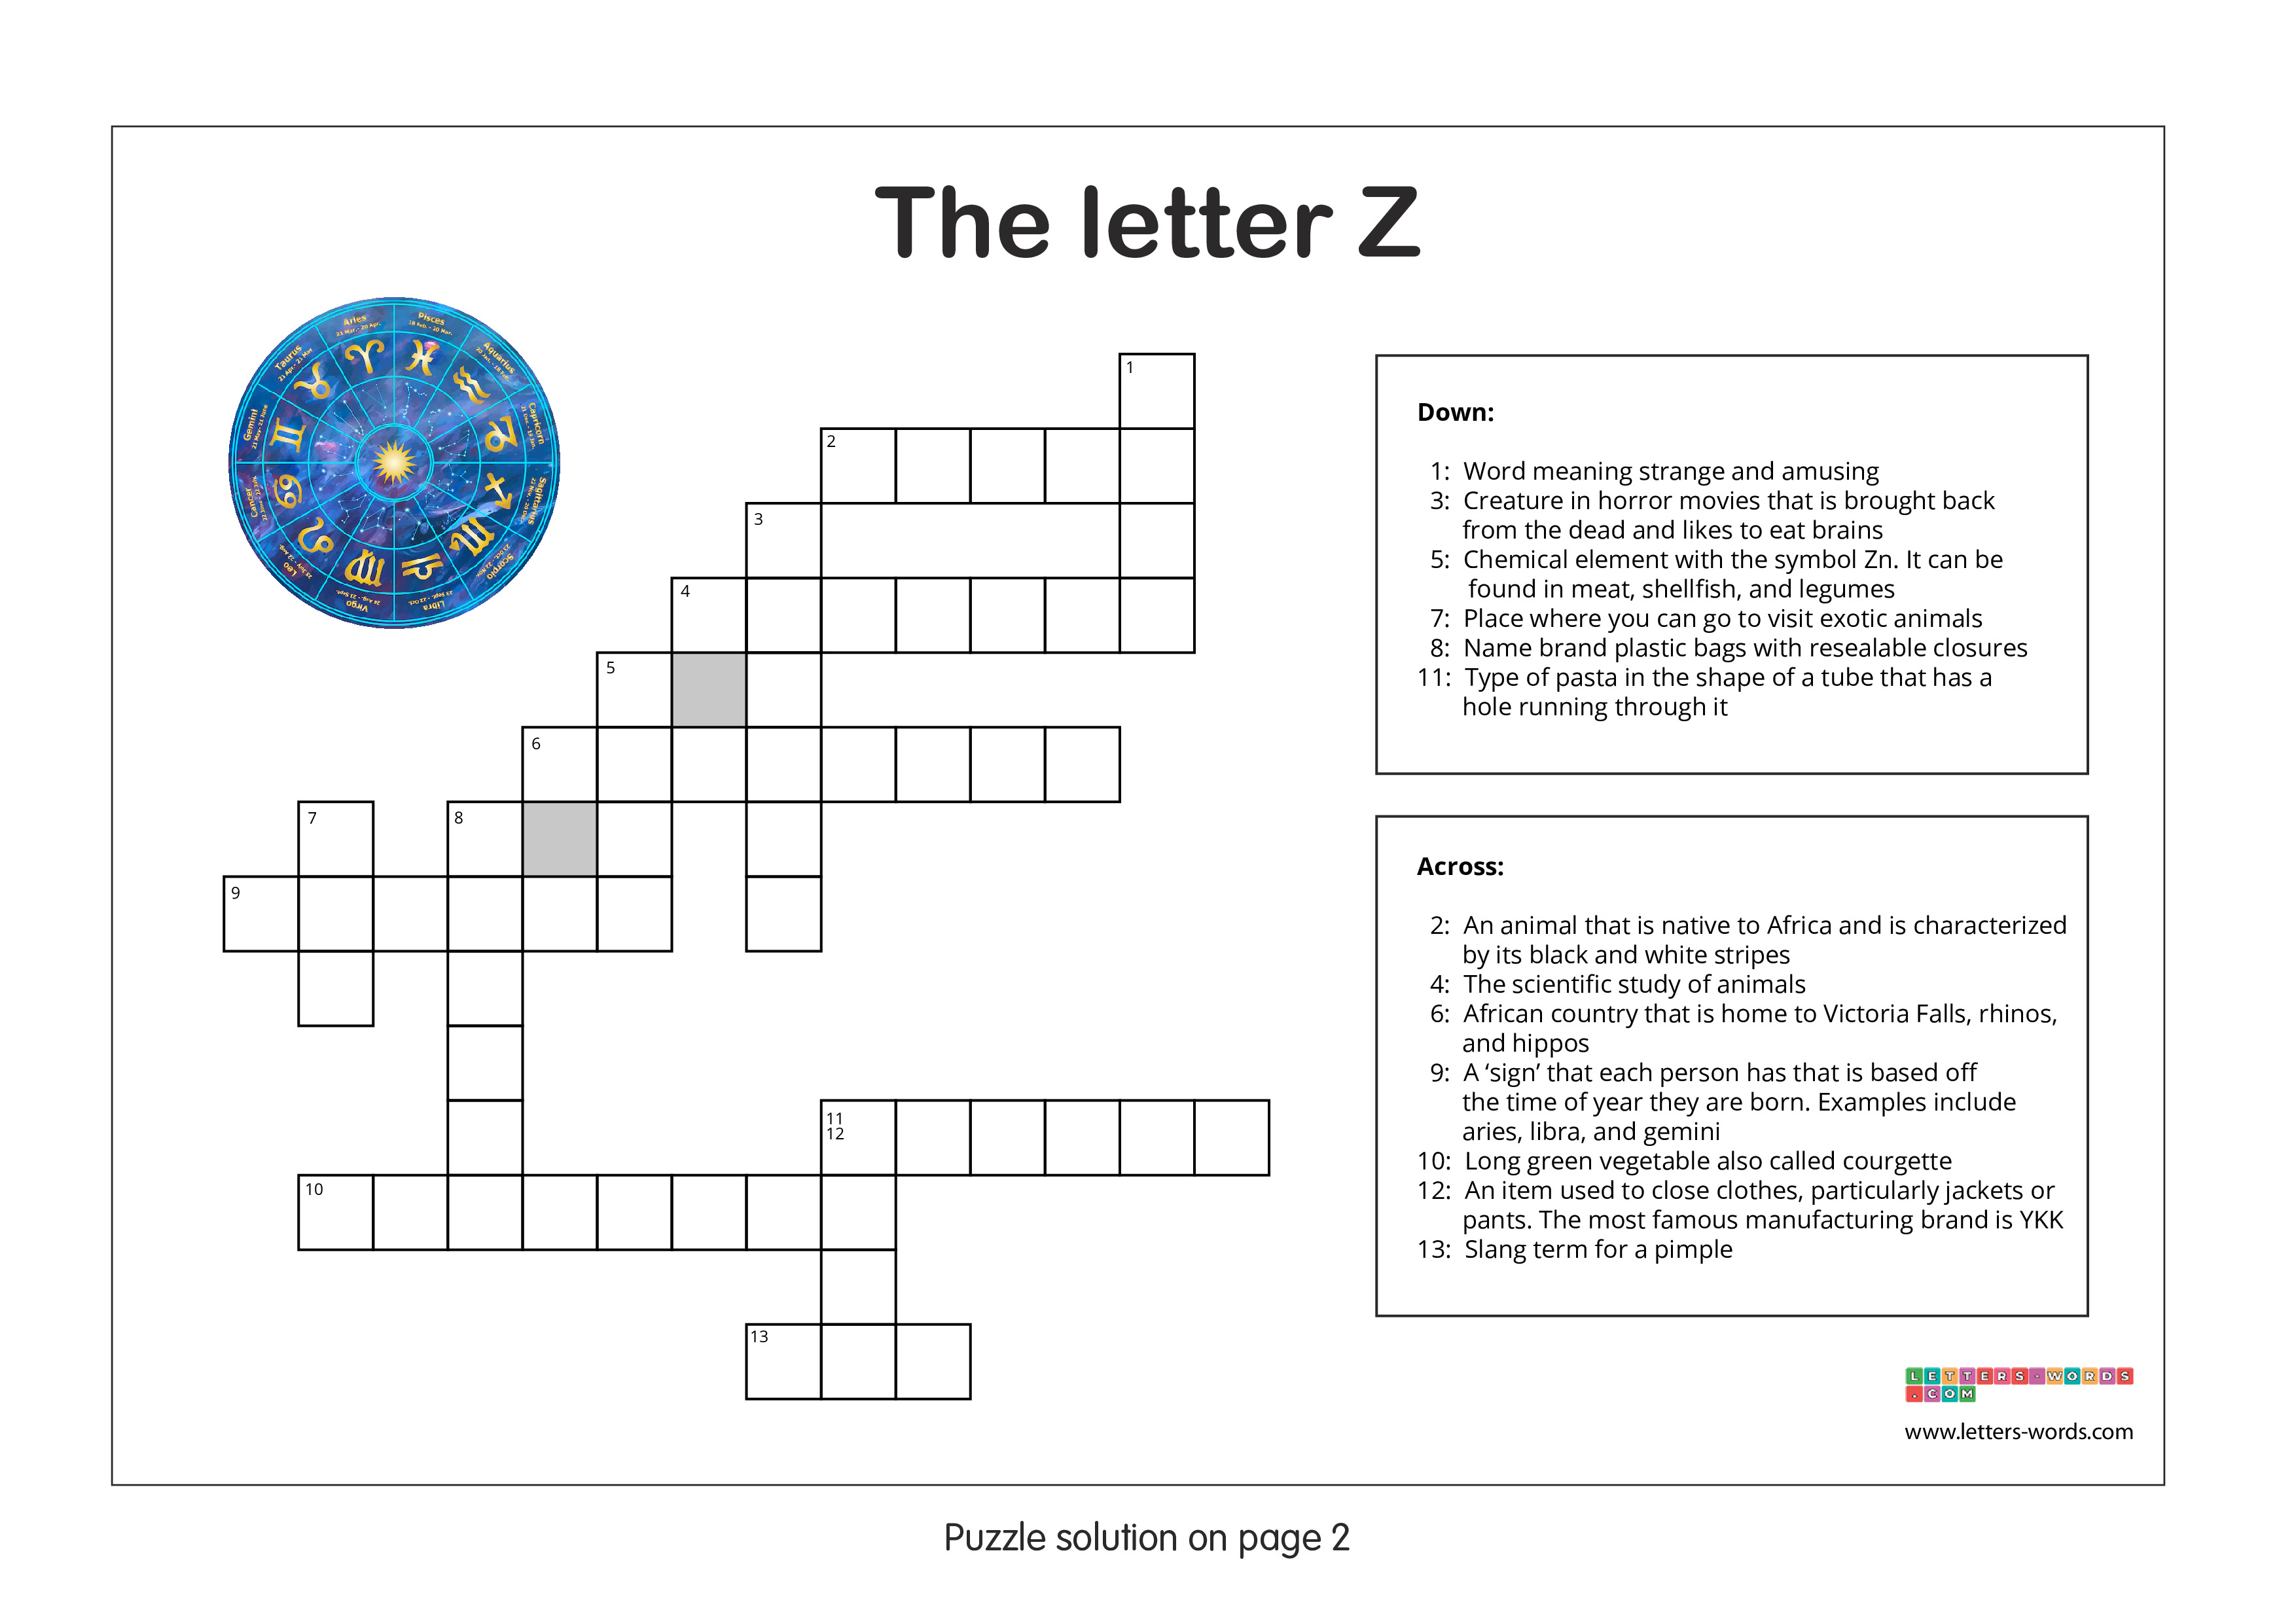 Crossword puzzles for children aged 10+ - The letter Z